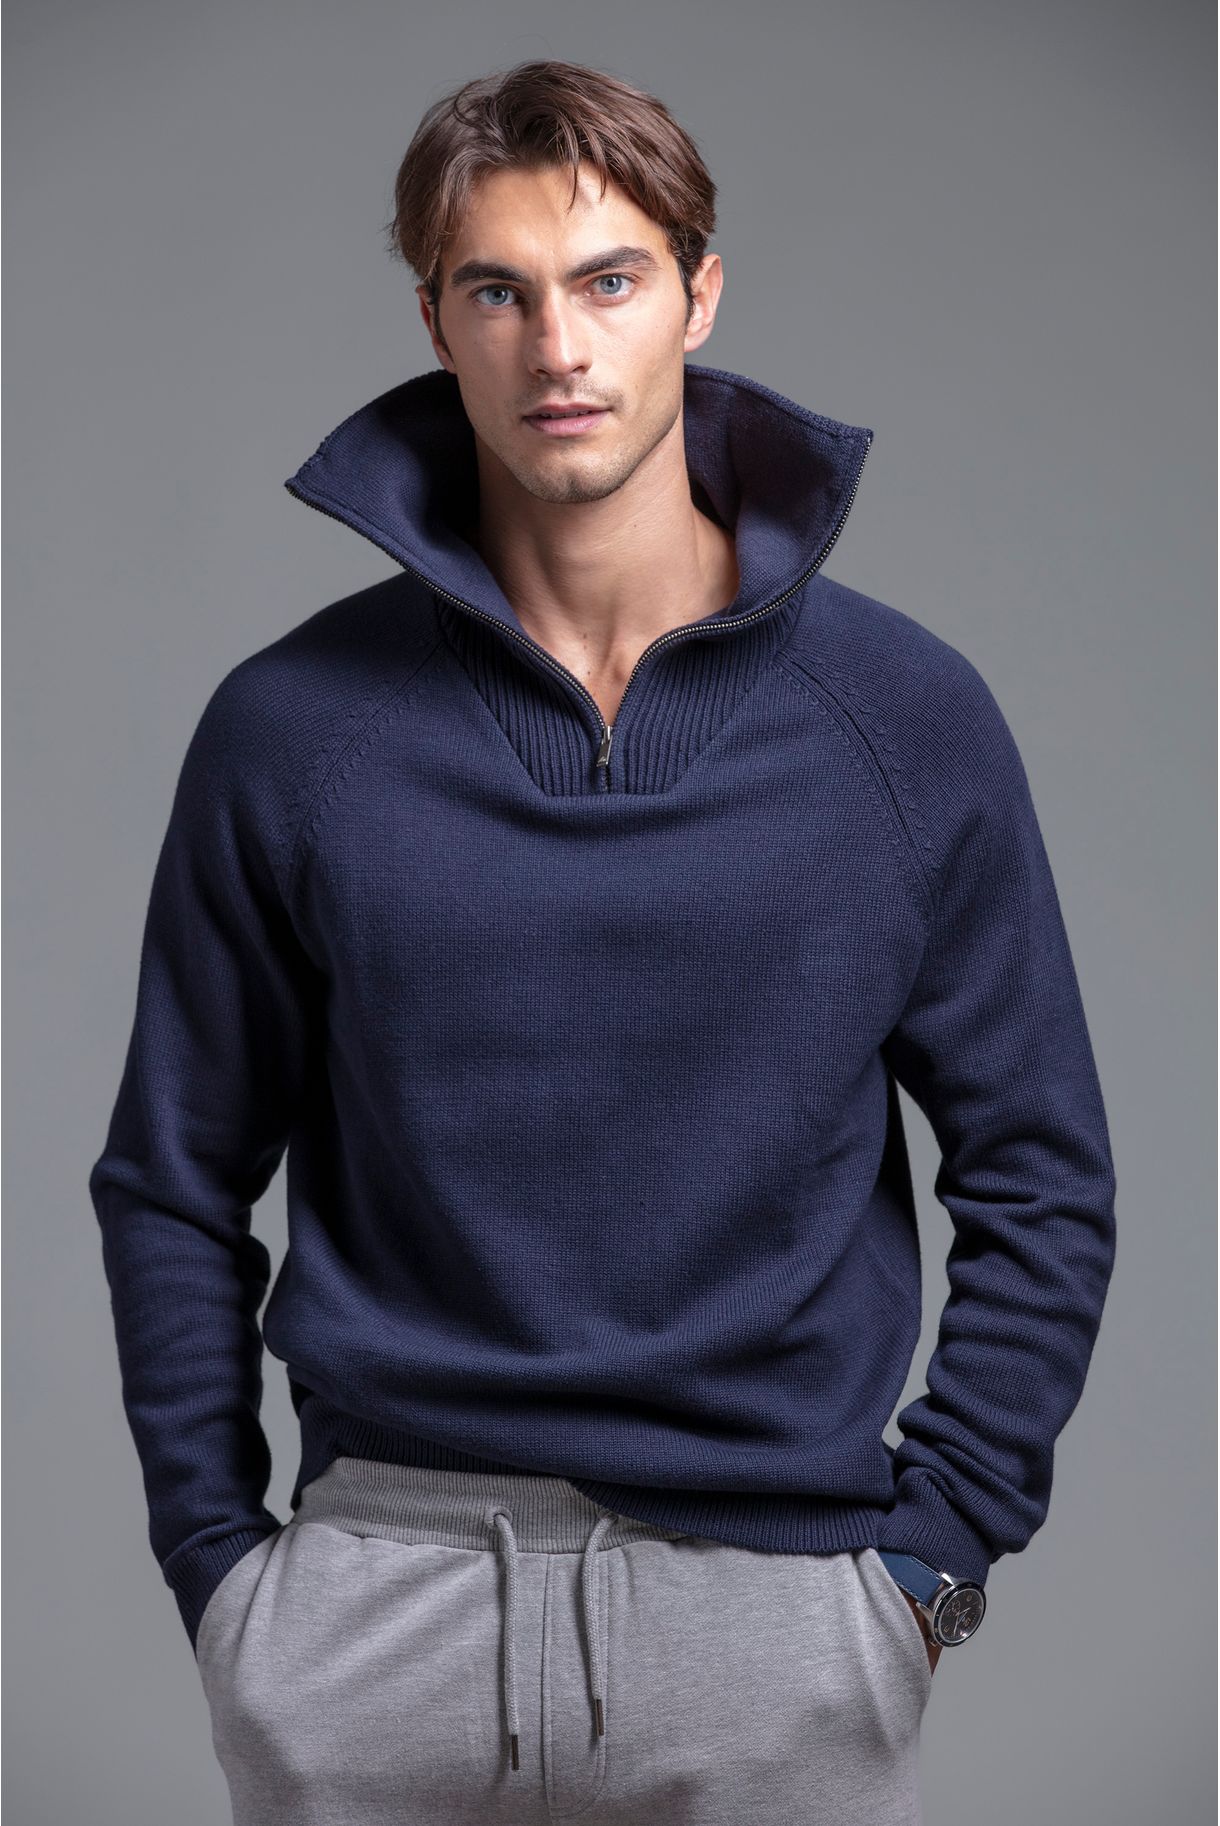 Knitted sweater for men